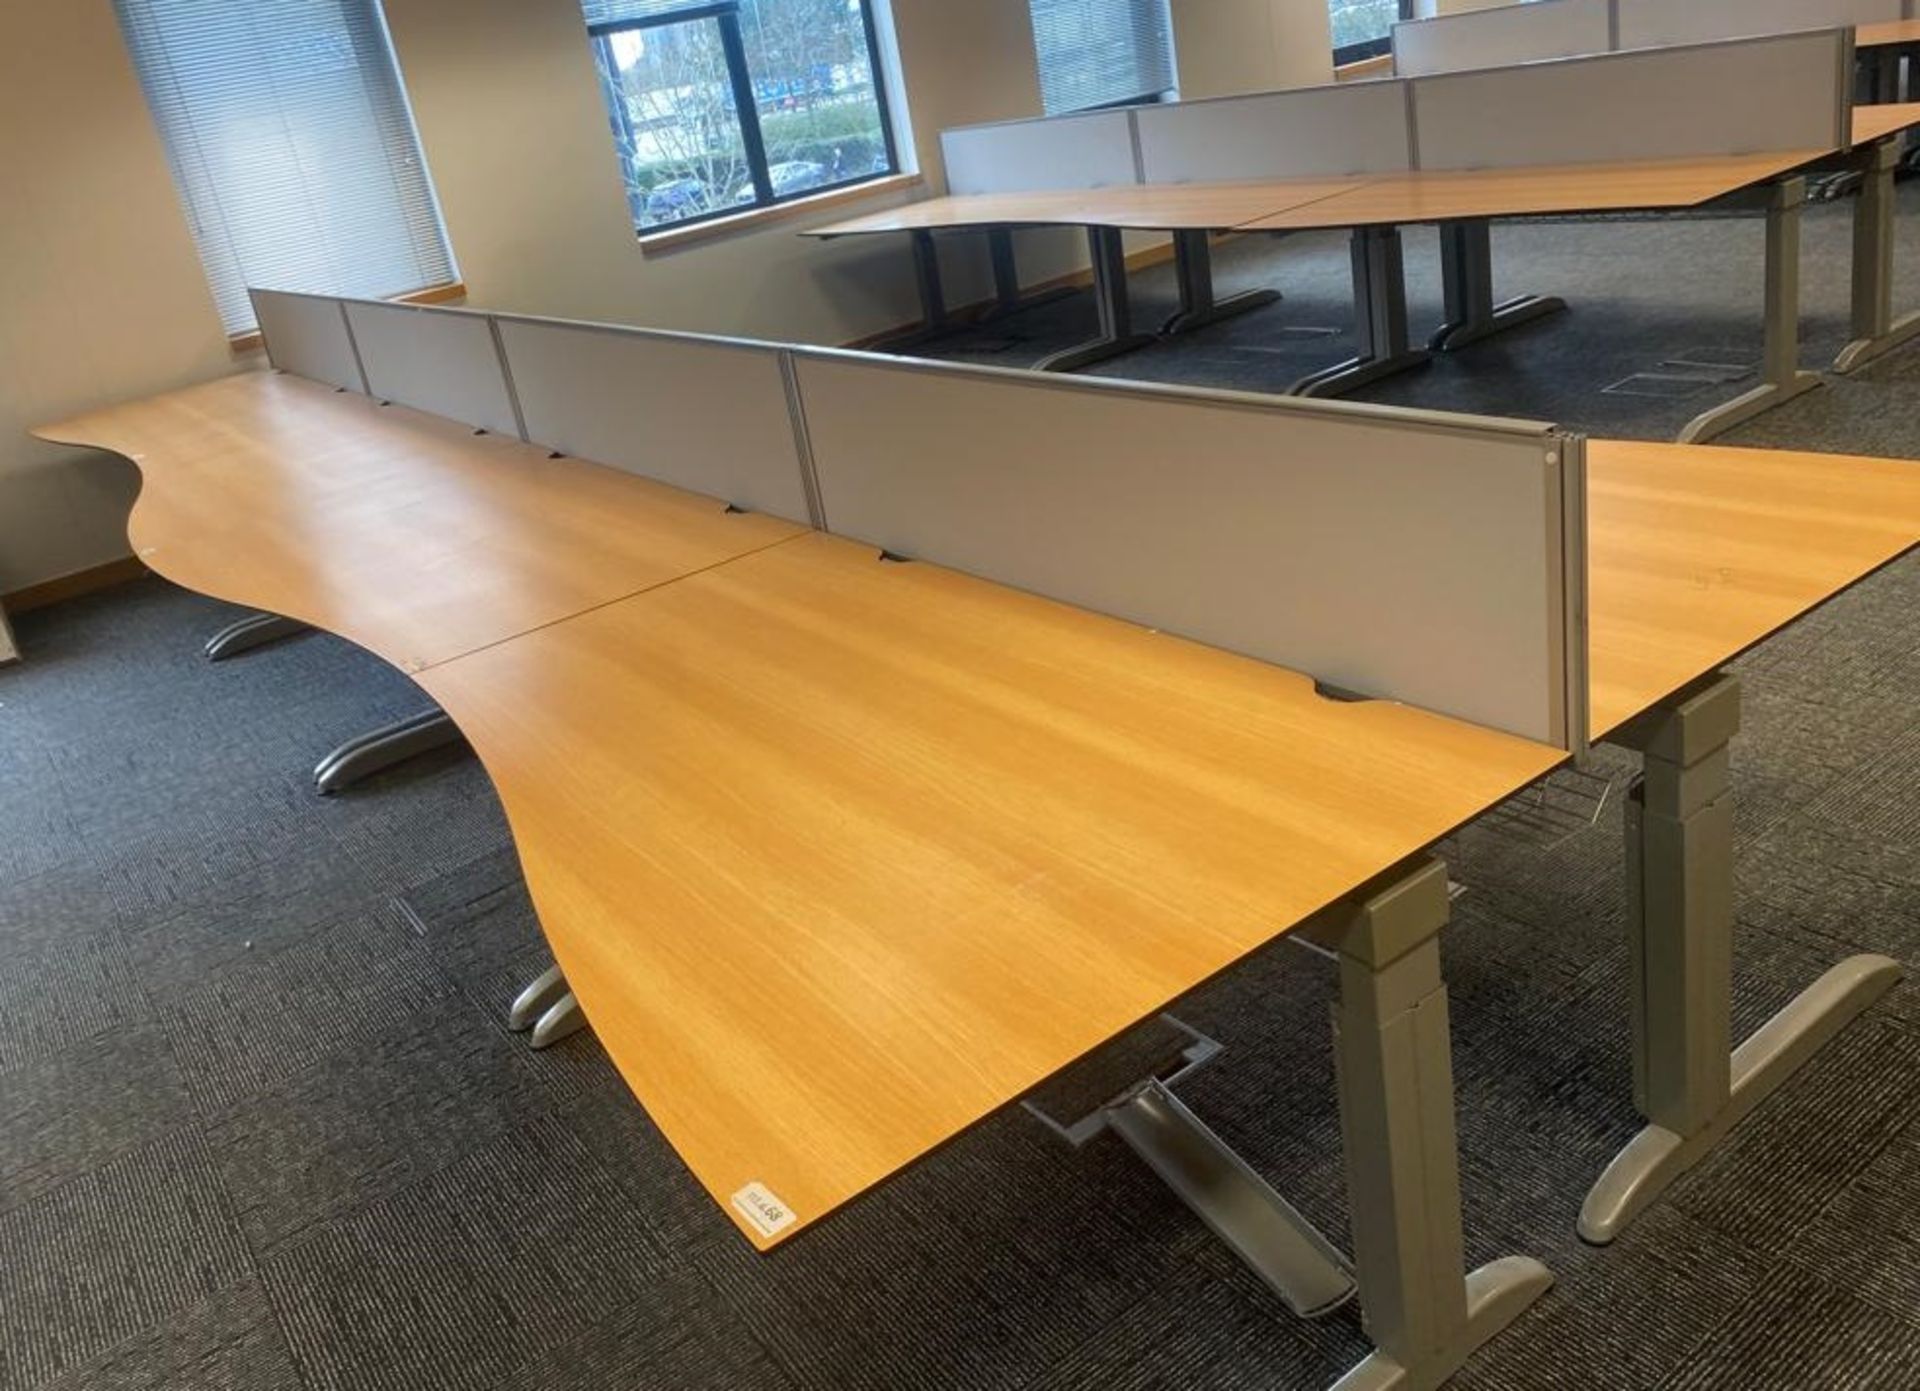 4 x Techo Wave Office Desks With Privacy Panels and Cable Tidy Cages - Beech Wood Finish with Grey - Image 4 of 20